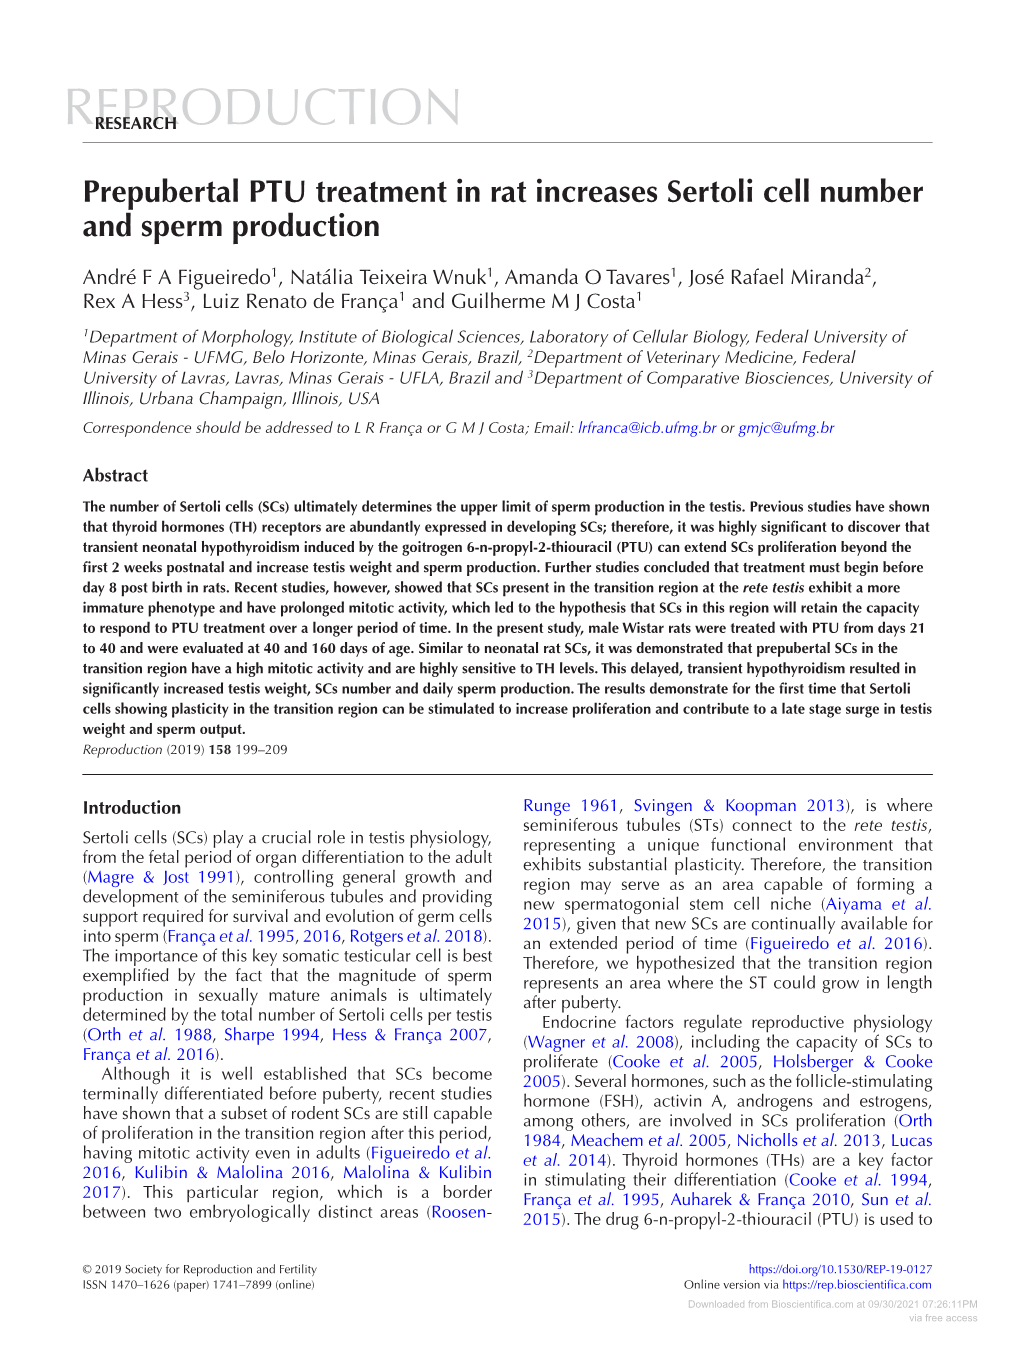 Prepubertal PTU Treatment in Rat Increases Sertoli Cell Number and Sperm Production